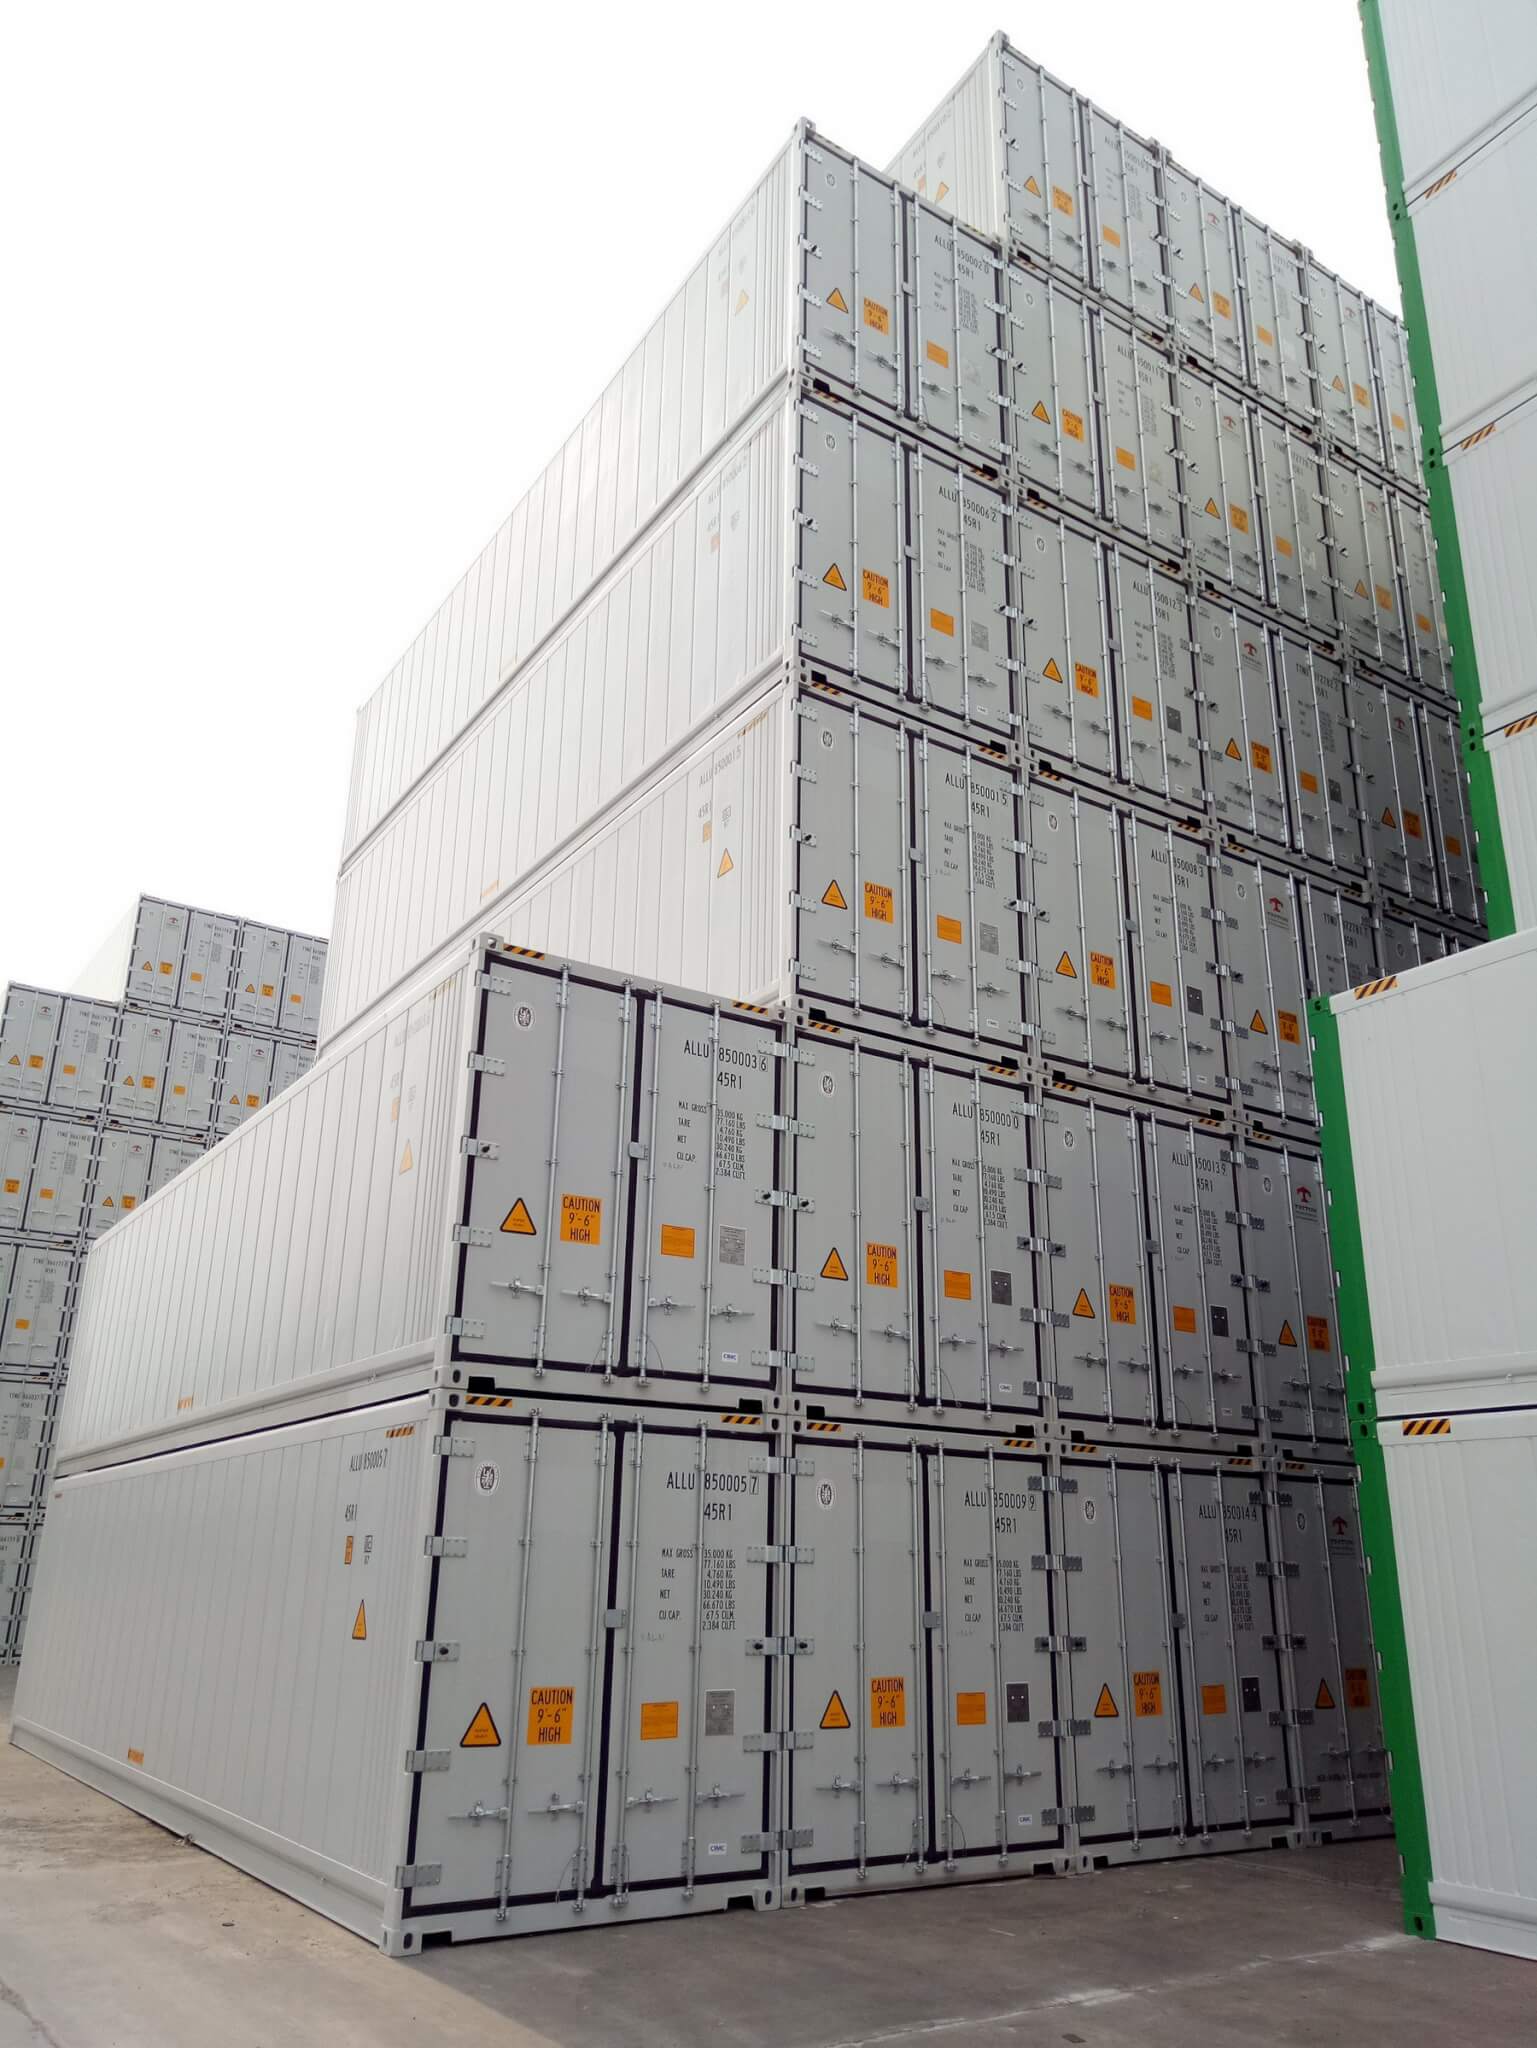 Used reefer containers for sale in India